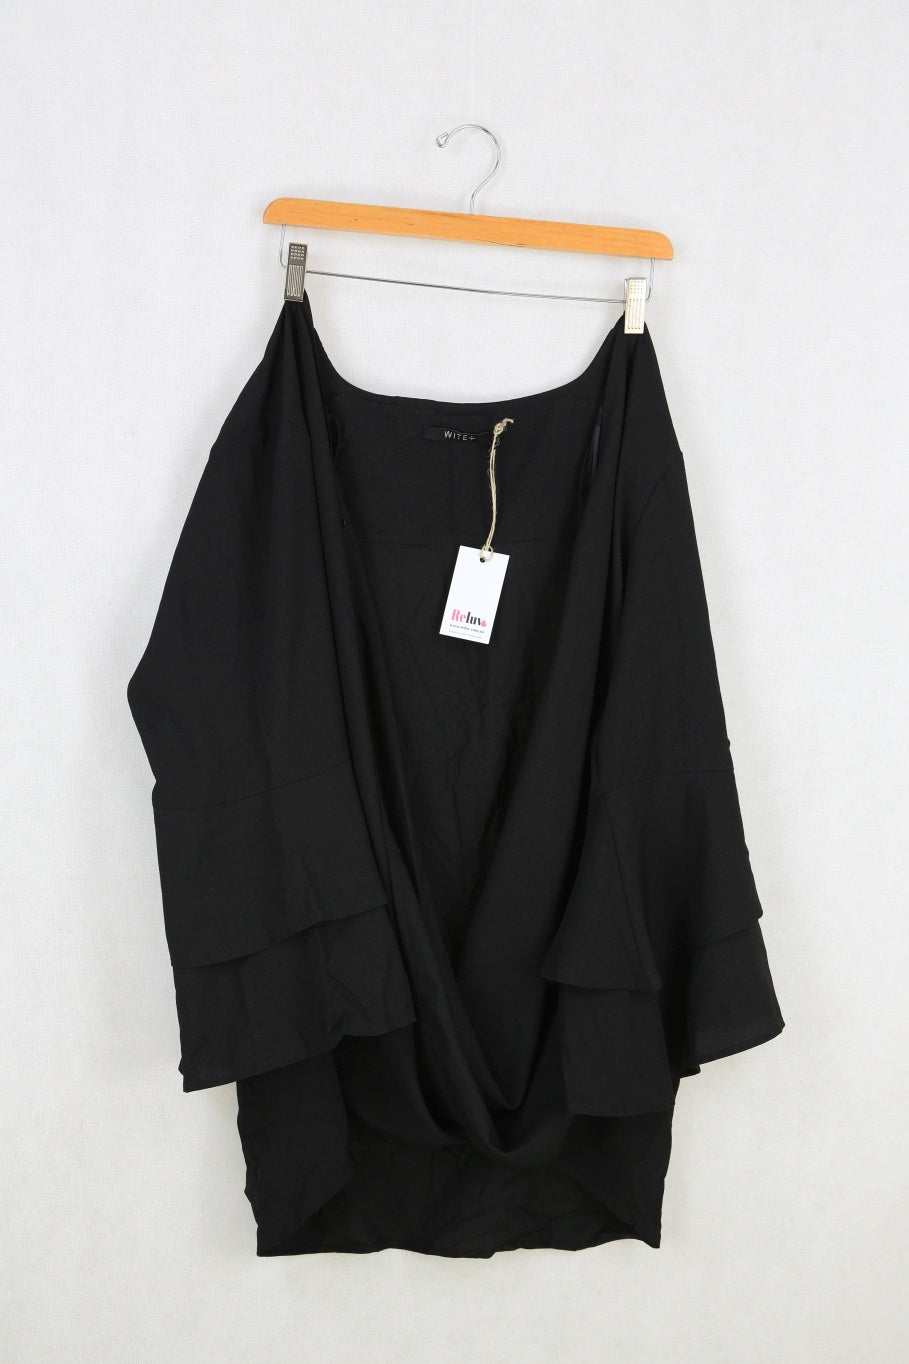 Wite+ Black Crossover Blouse 20